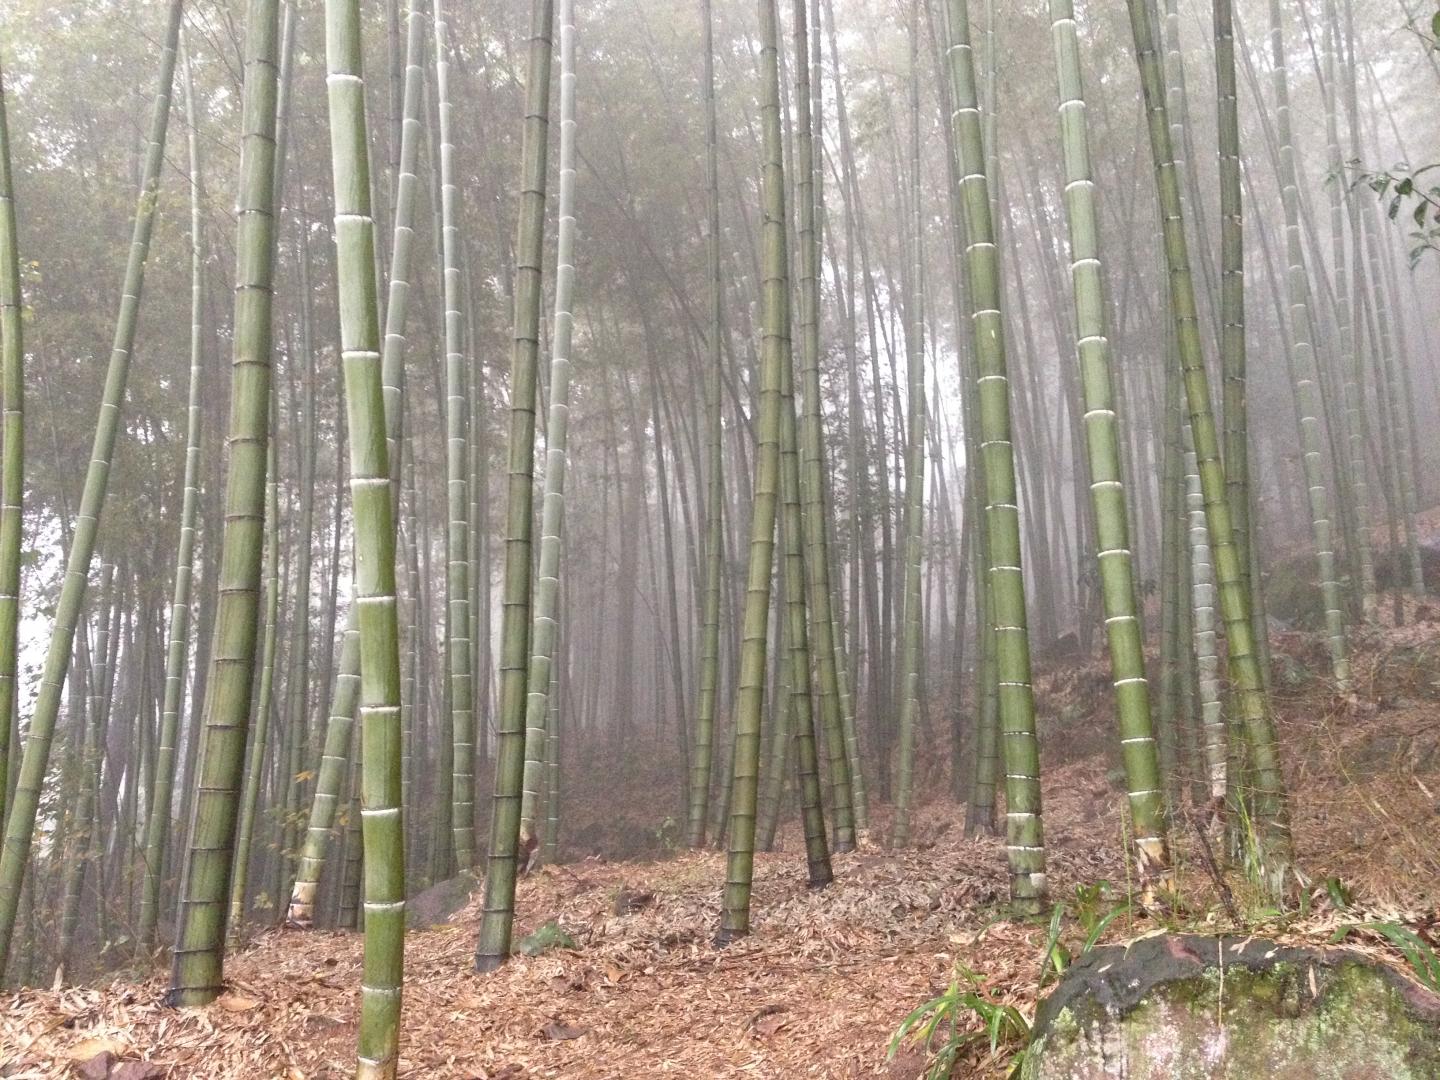 Monocrop Bamboo Forest in Sichuan Province, China